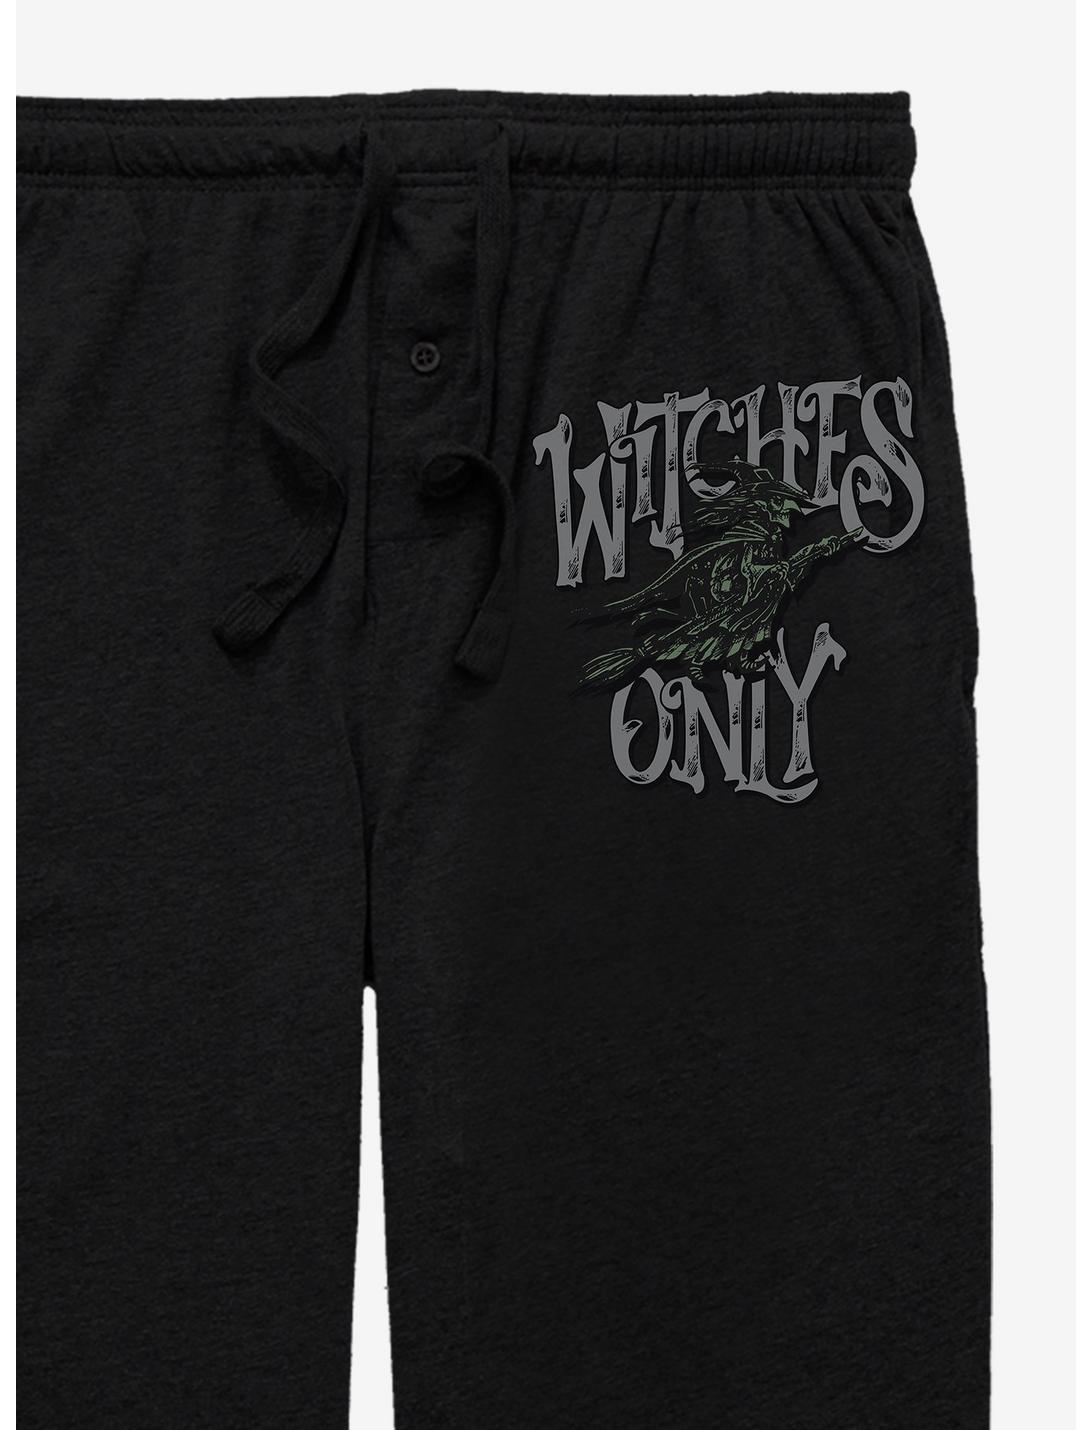 Halloween Withces Only Pajama Pants, BLACK, hi-res